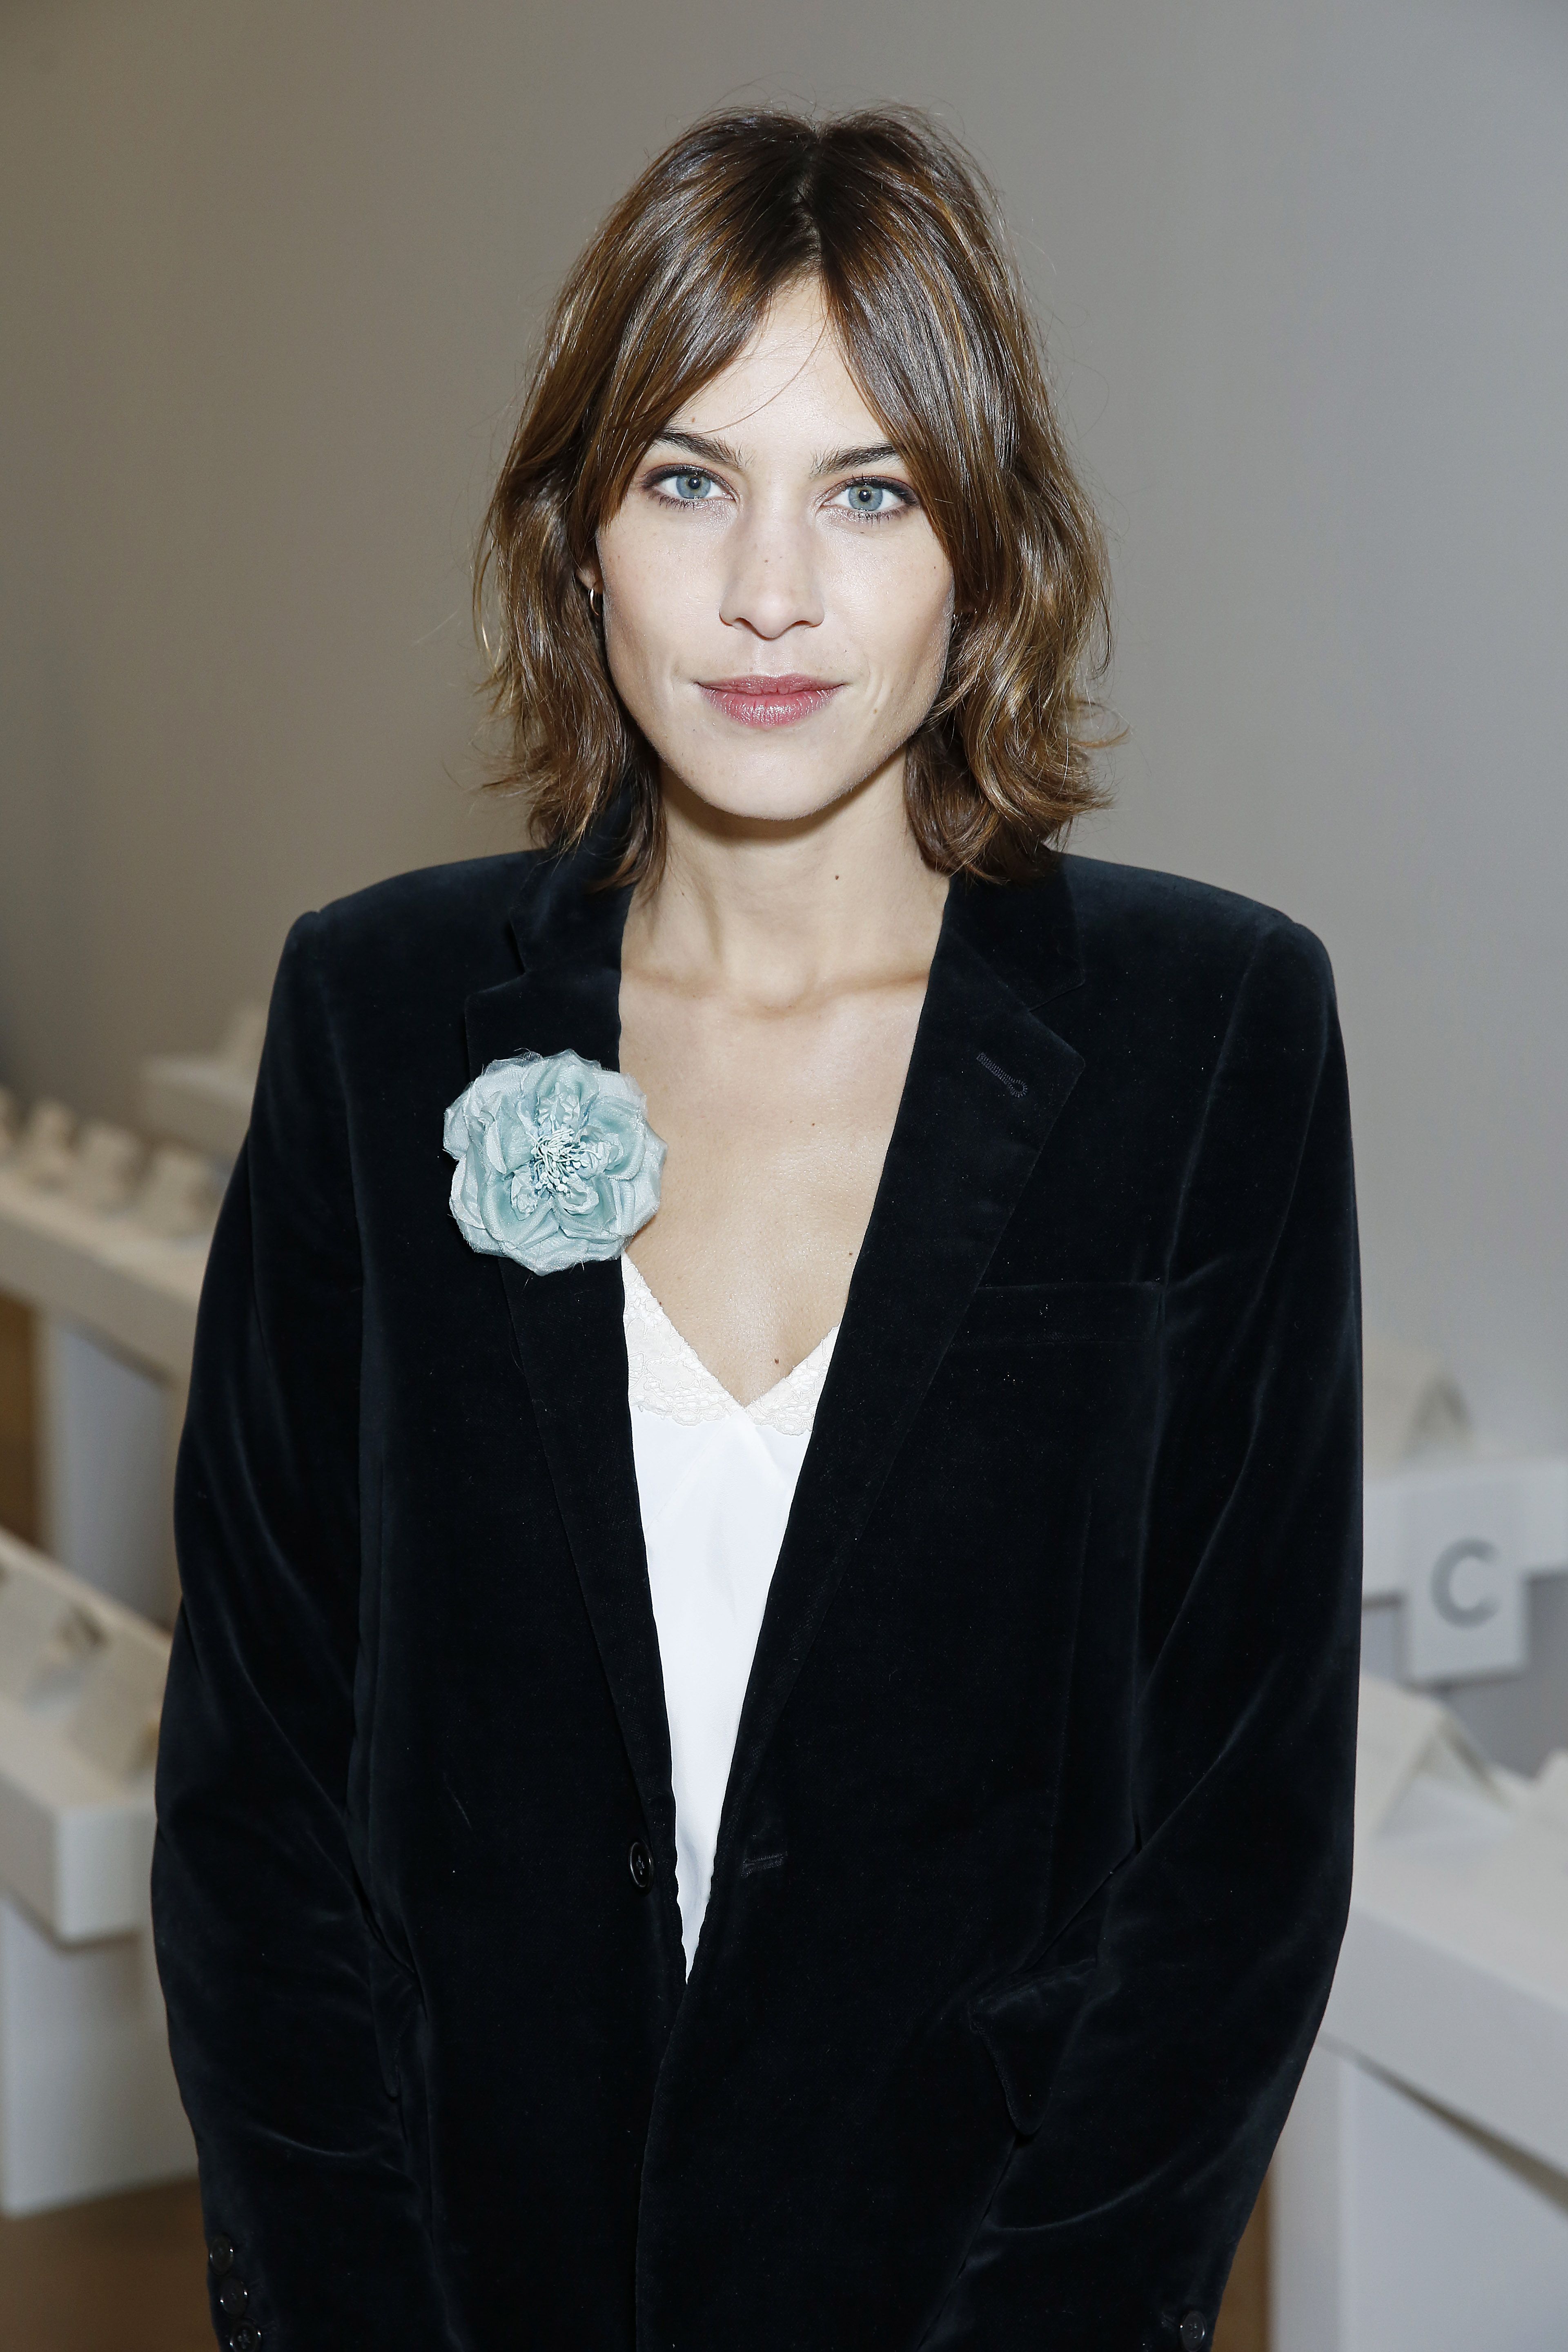 Image of Alexa Chung blunt shag haircut with center part